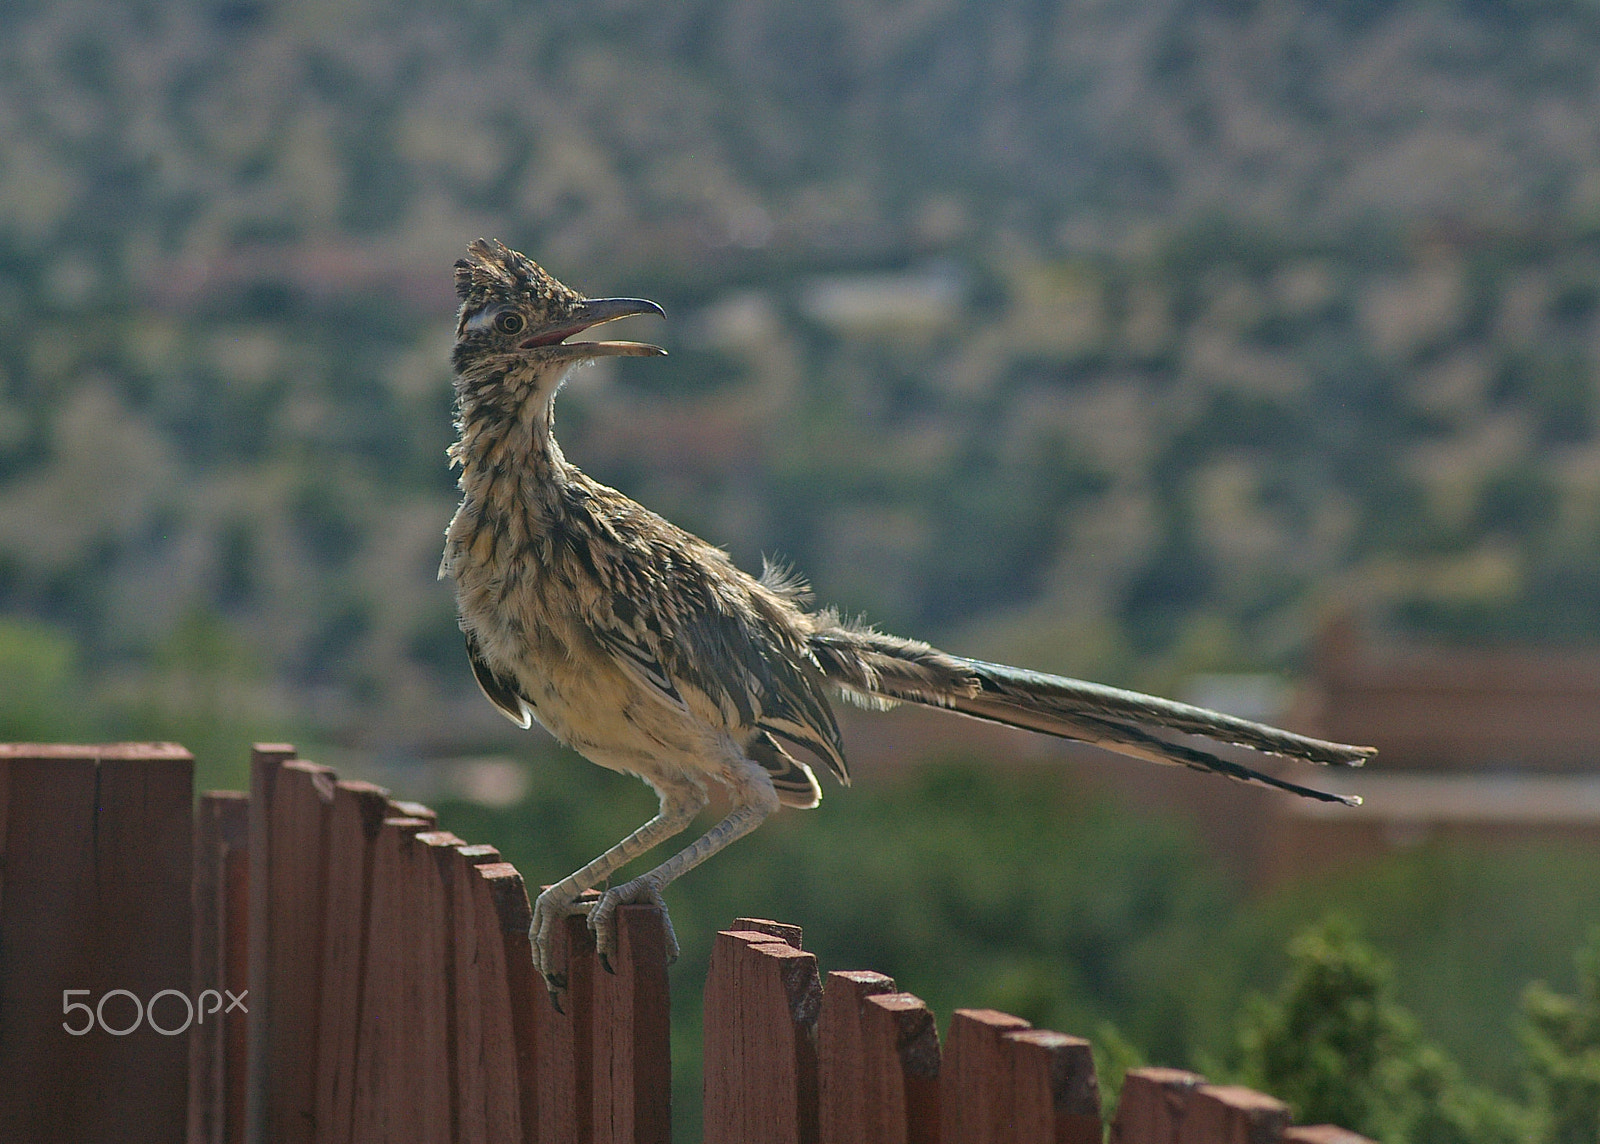 Pentax *ist DL sample photo. Roadrunner on fence photography